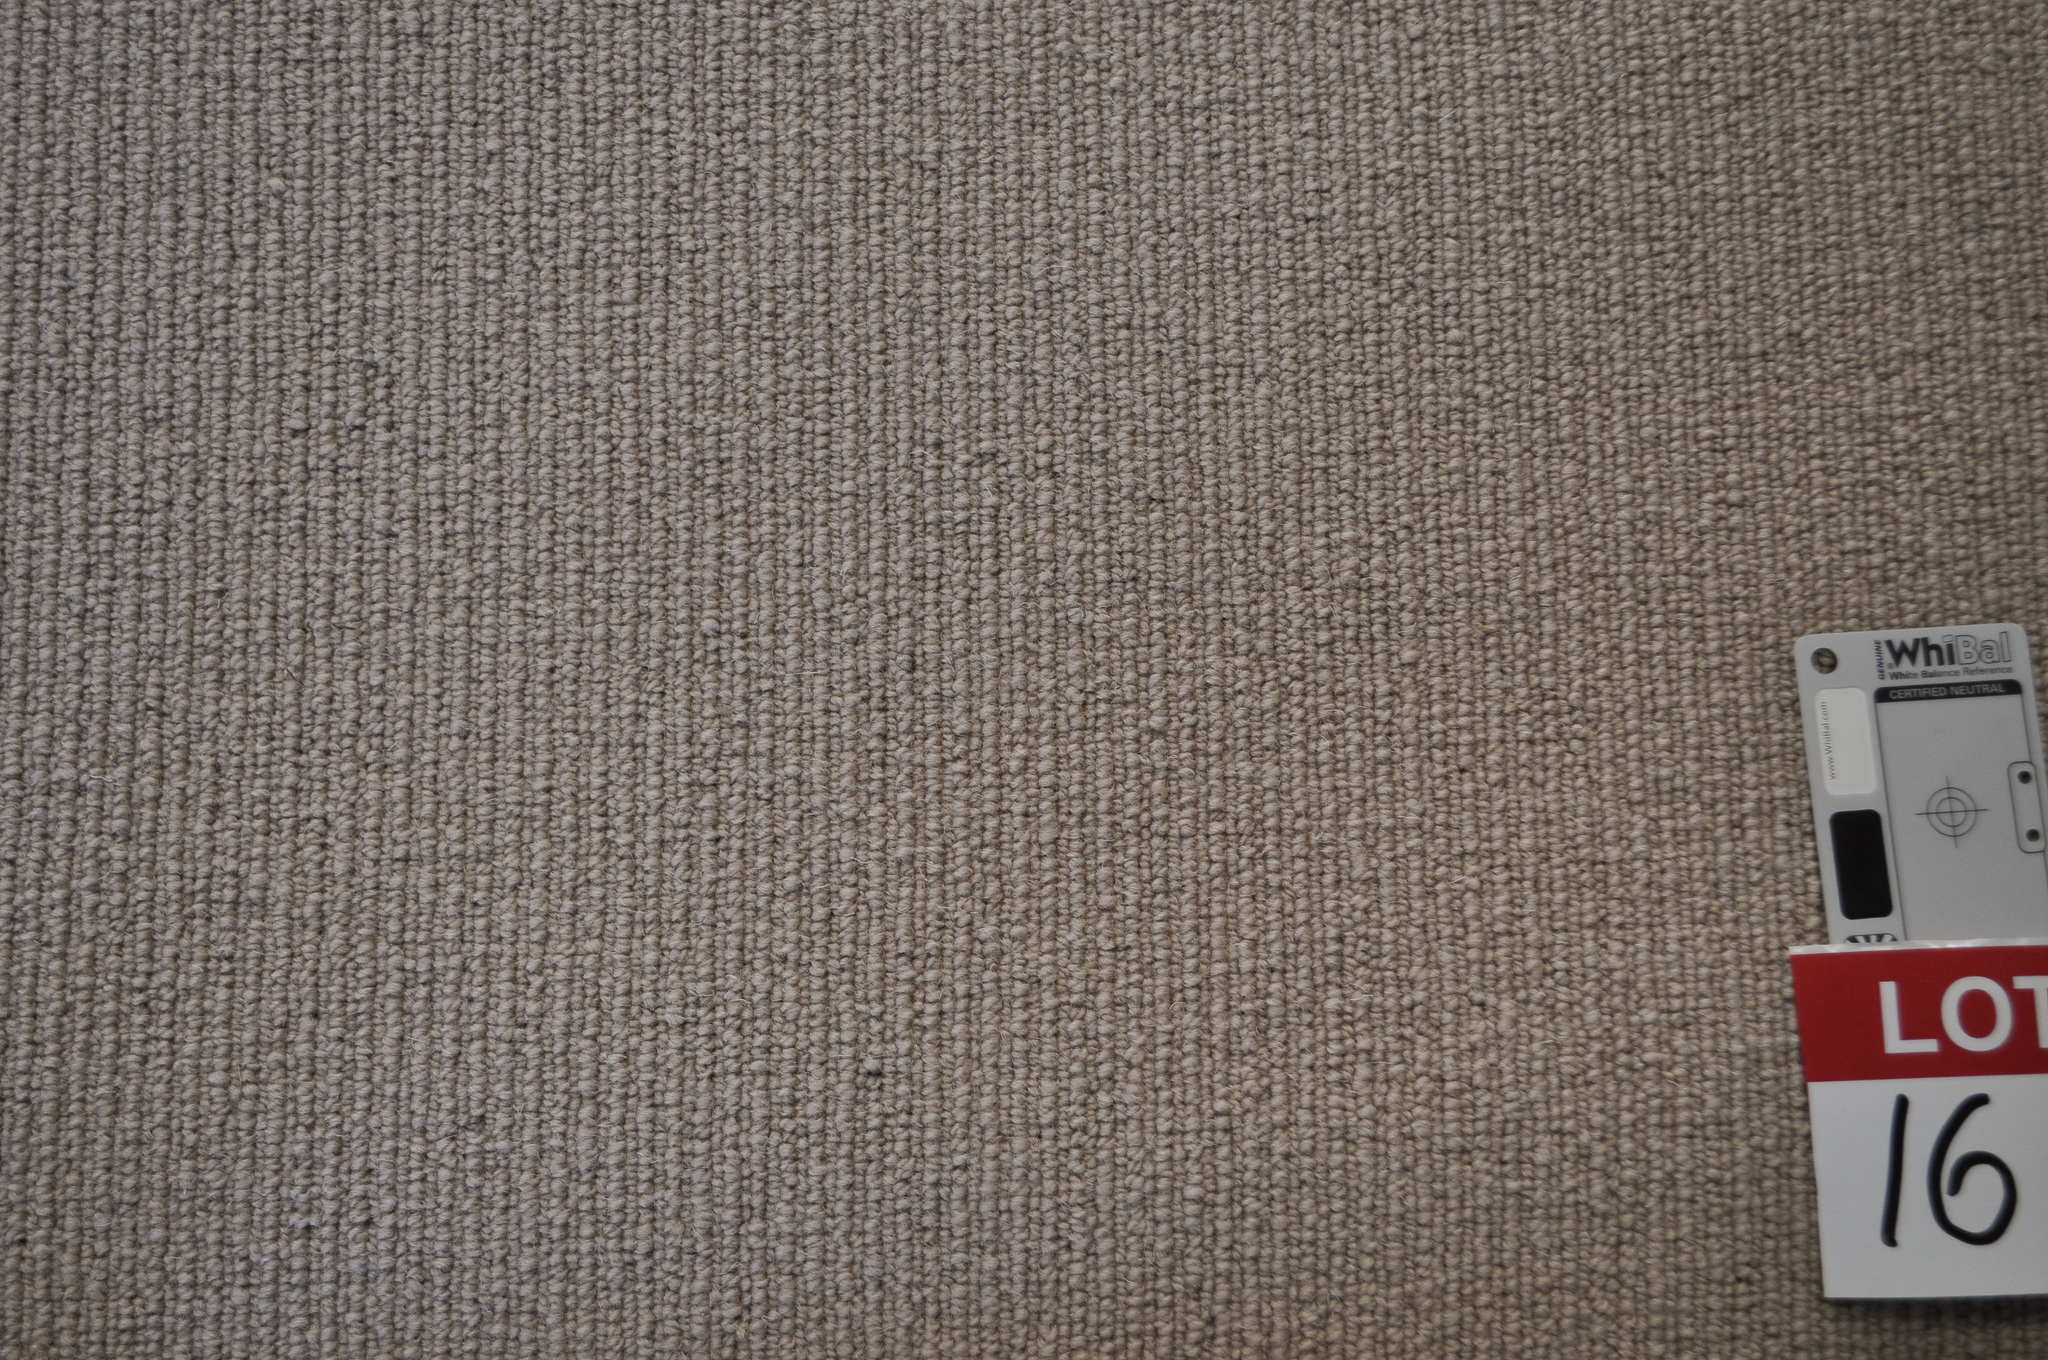 dark beige colored, sisal type, roll of carpet on sale at Concord Floors, it being a remnant roll in Concord Floor's warehouse.